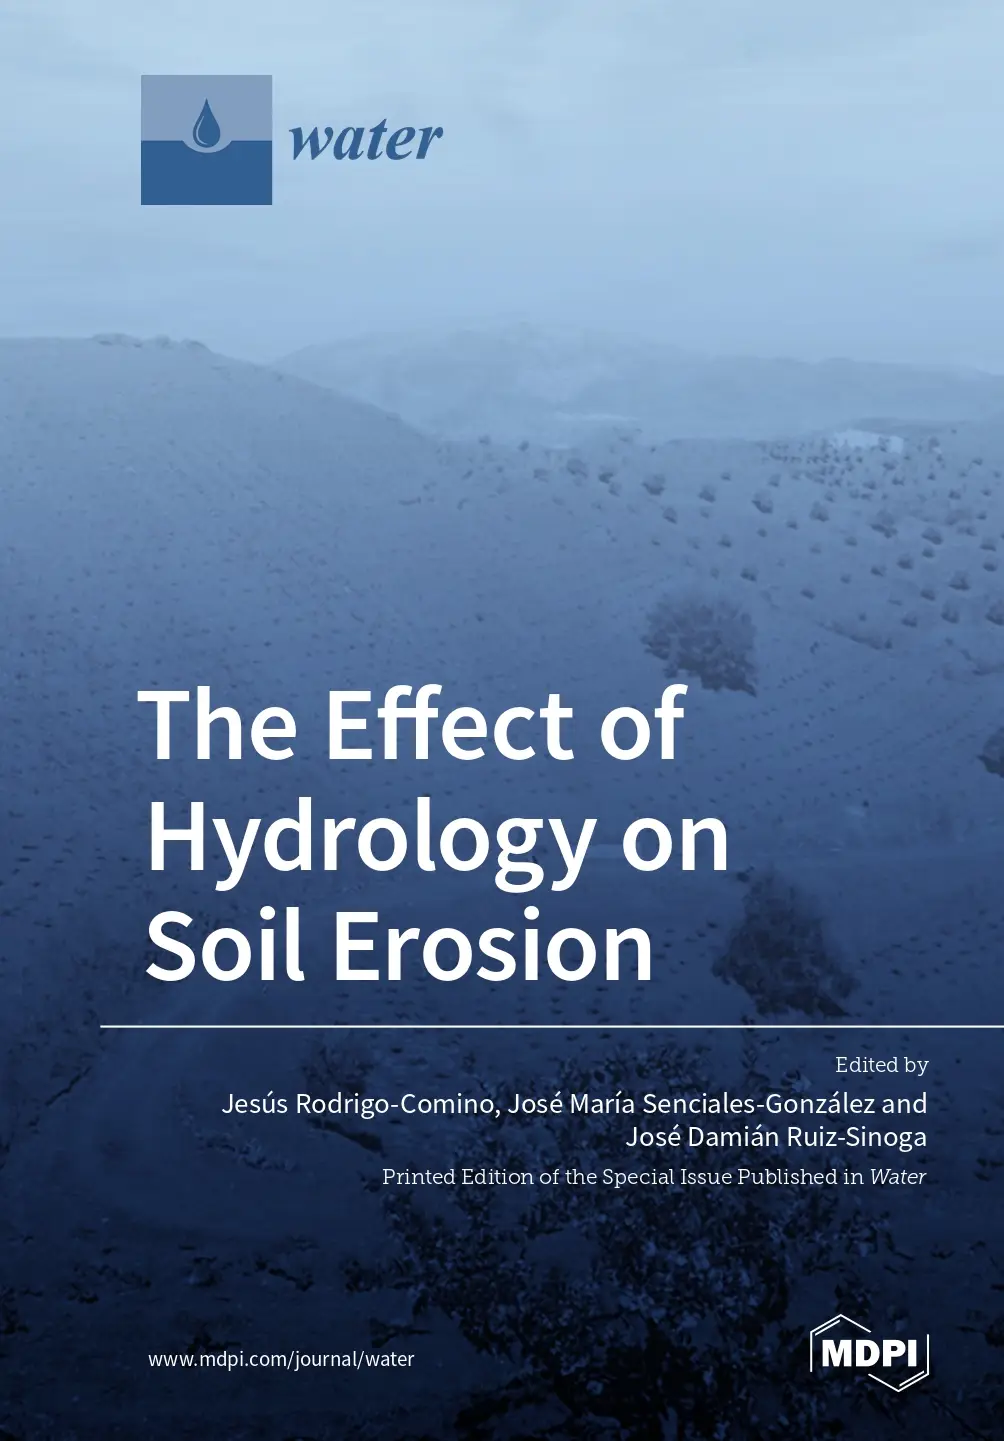 The Effect of Hydrology on Soil Erosion